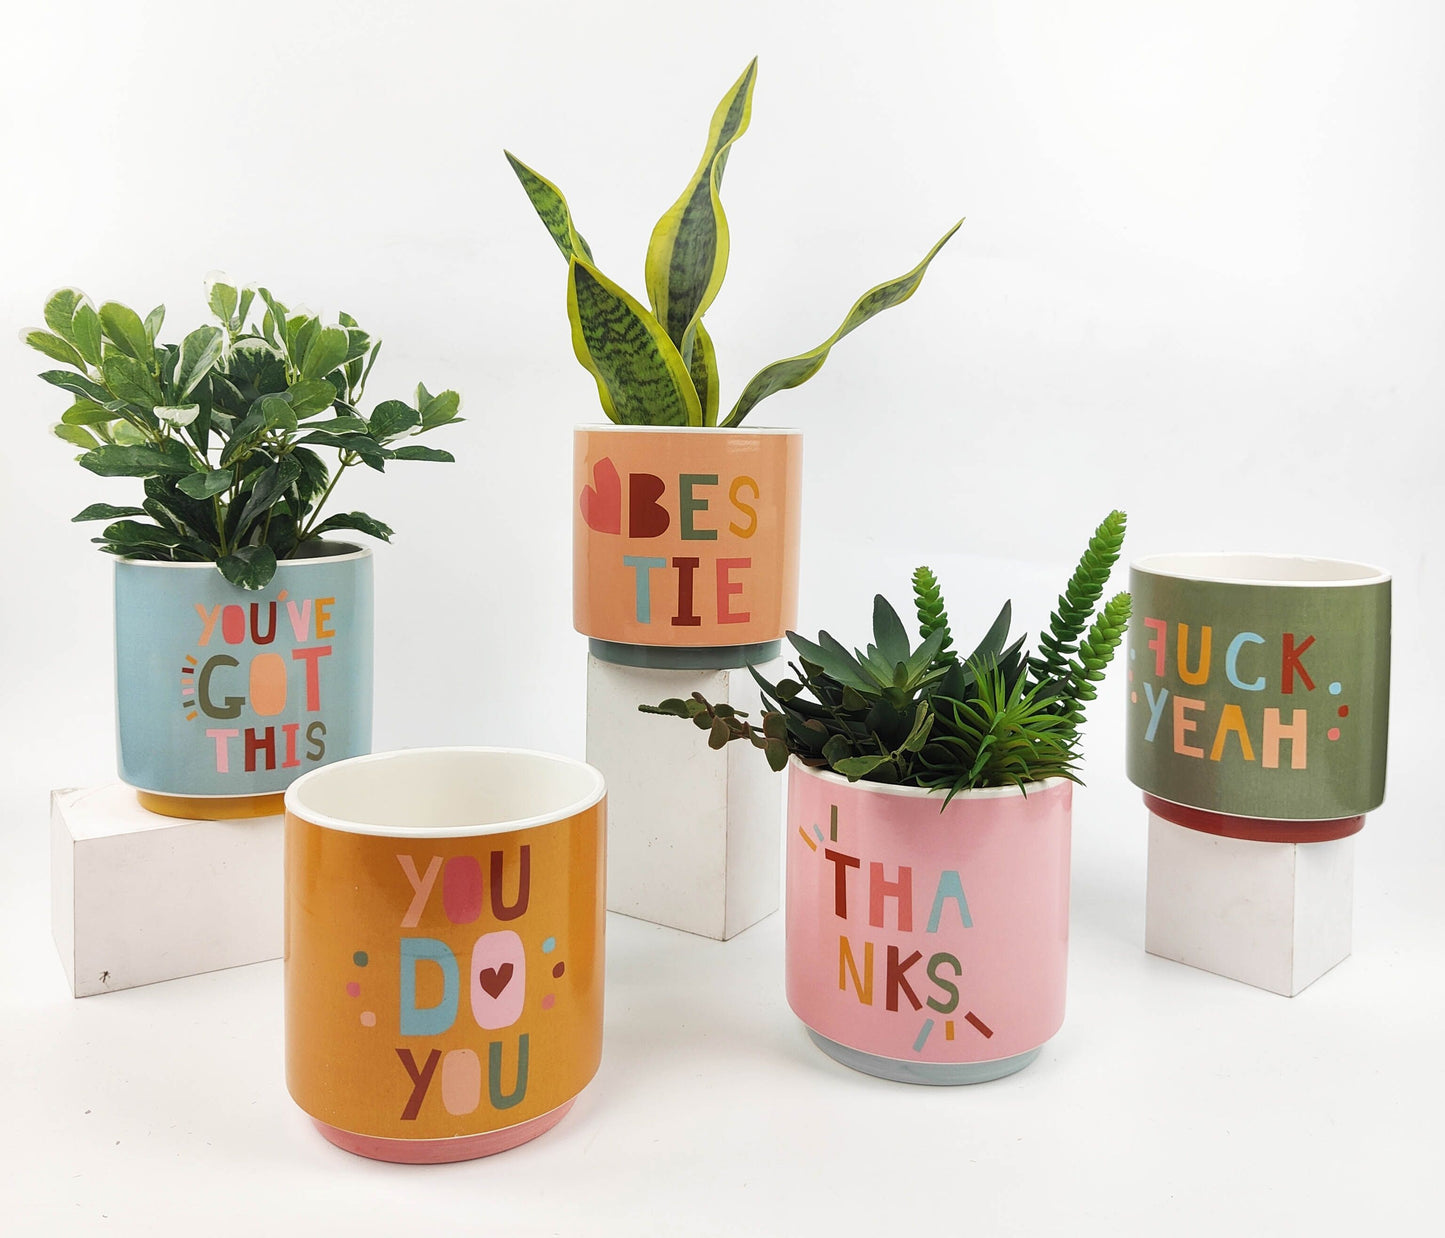 Funky Quote Planter Blue | You’ve Got This